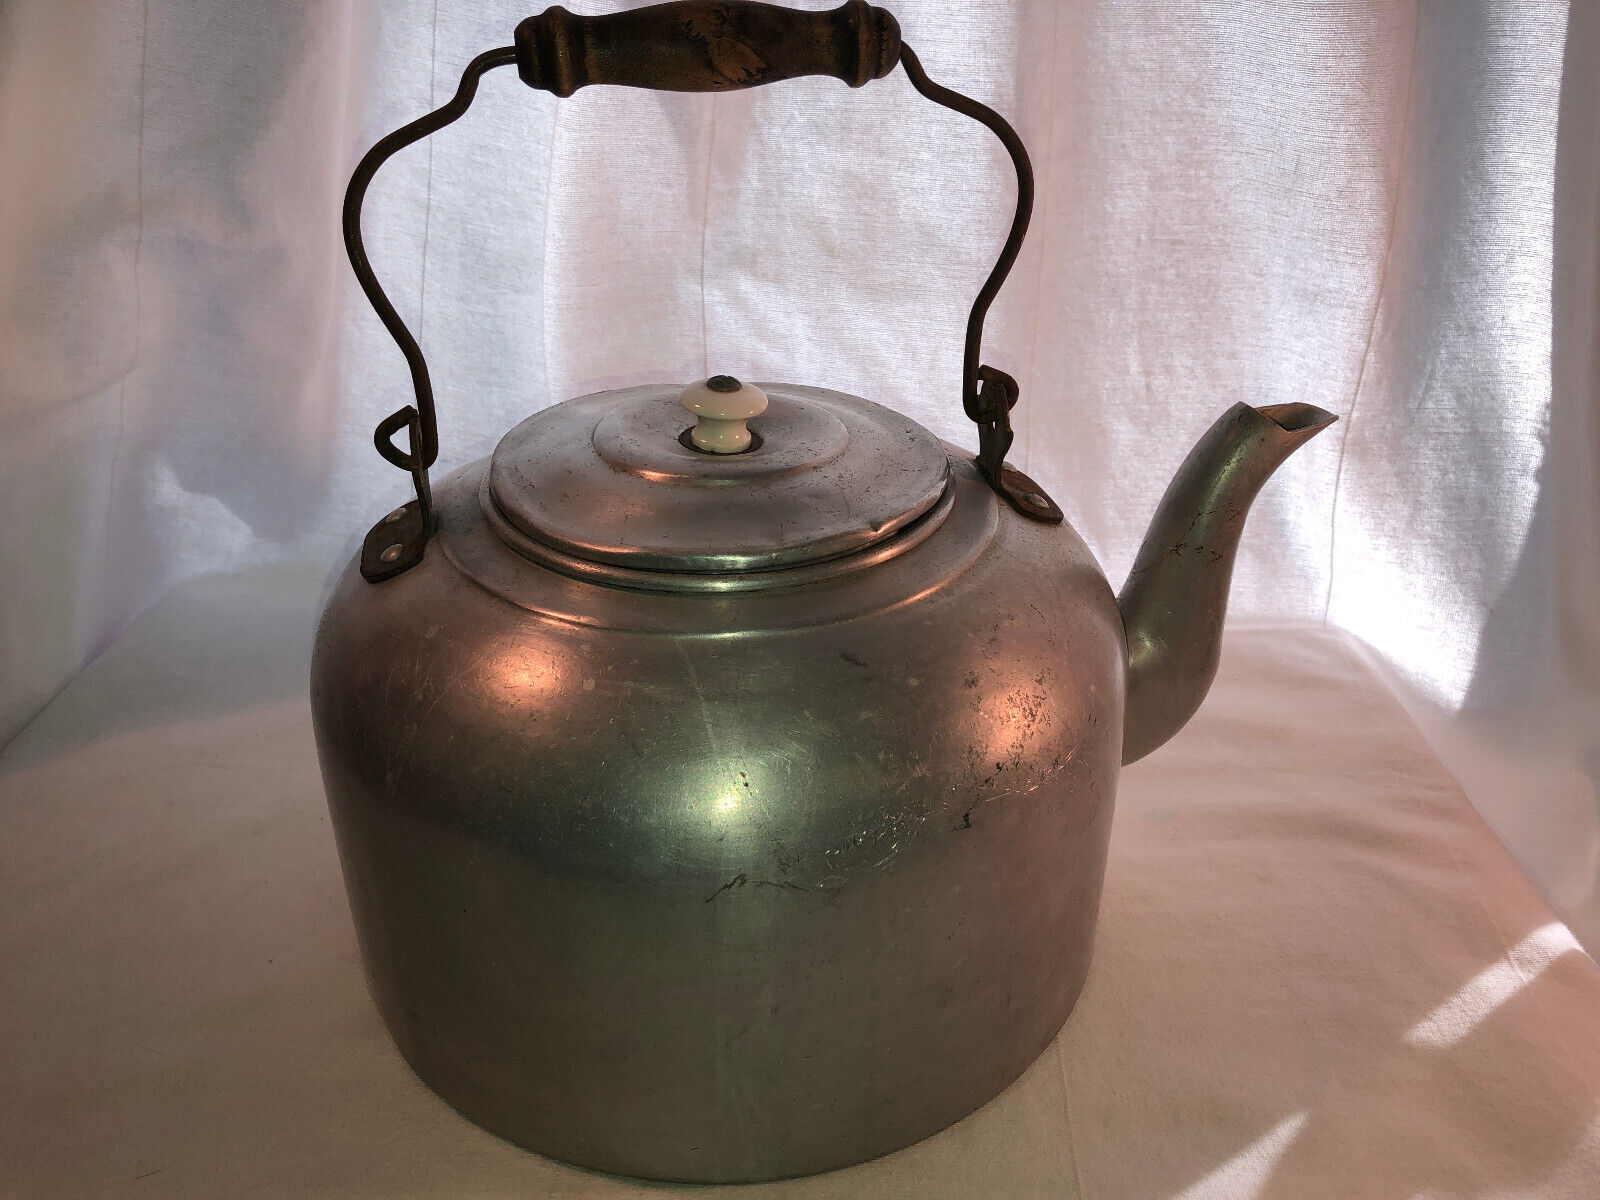 Primary image for Reliance Aluminum Tea Kettle With China Knob And Wooden Handle About Gallon Size